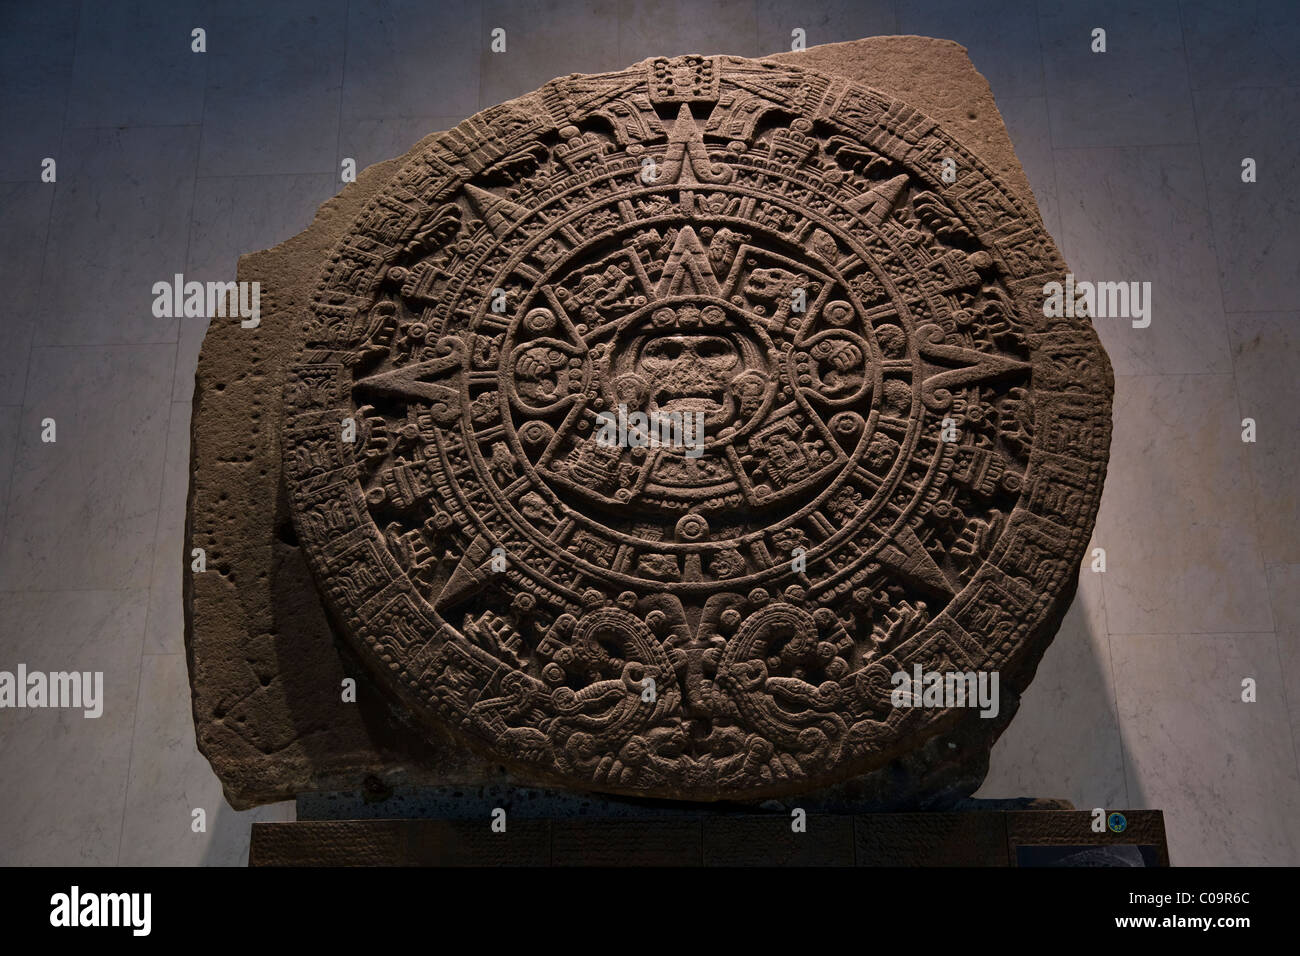 Mexica Sun Stone, Stone of the Fifth Sun, or Aztec calendar in the National Museum of Anthropology in Mexico City. Stock Photo